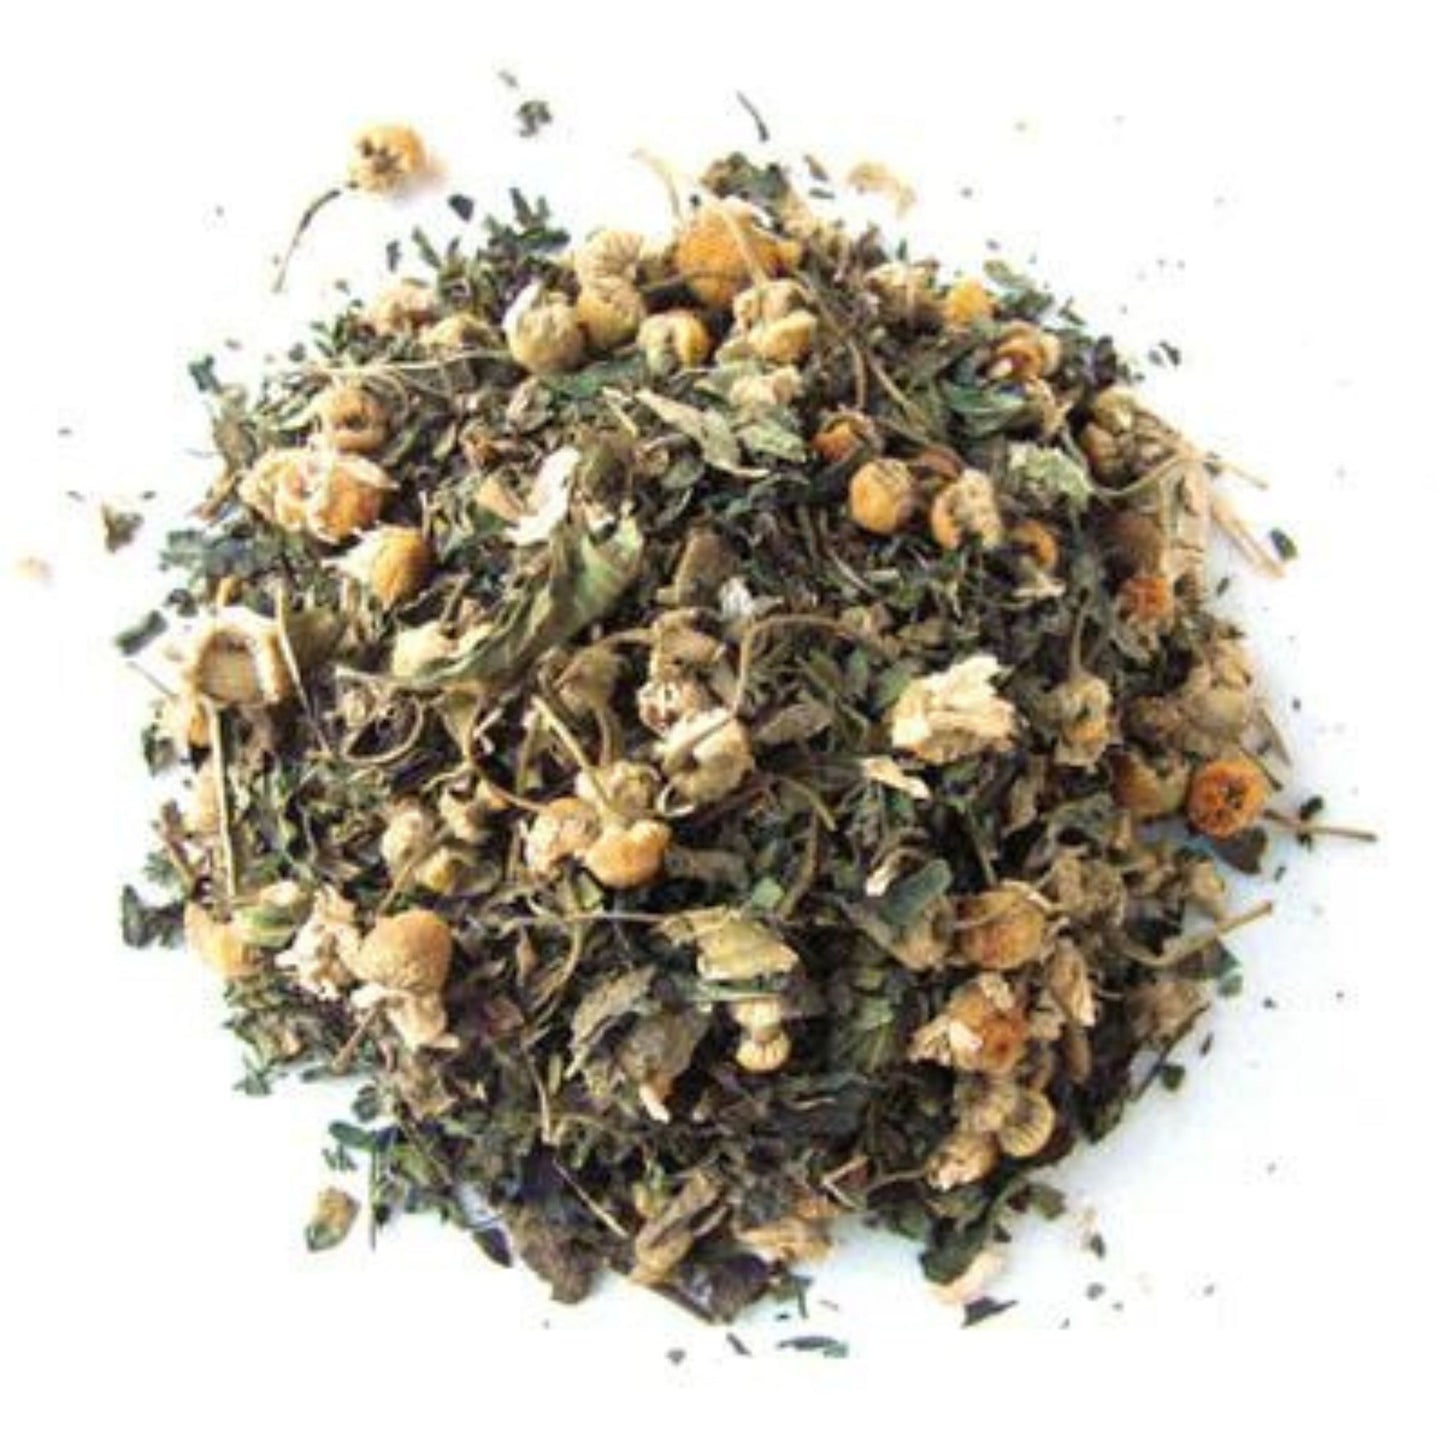 Close-up of the dried herbs used in the Dream Tea.